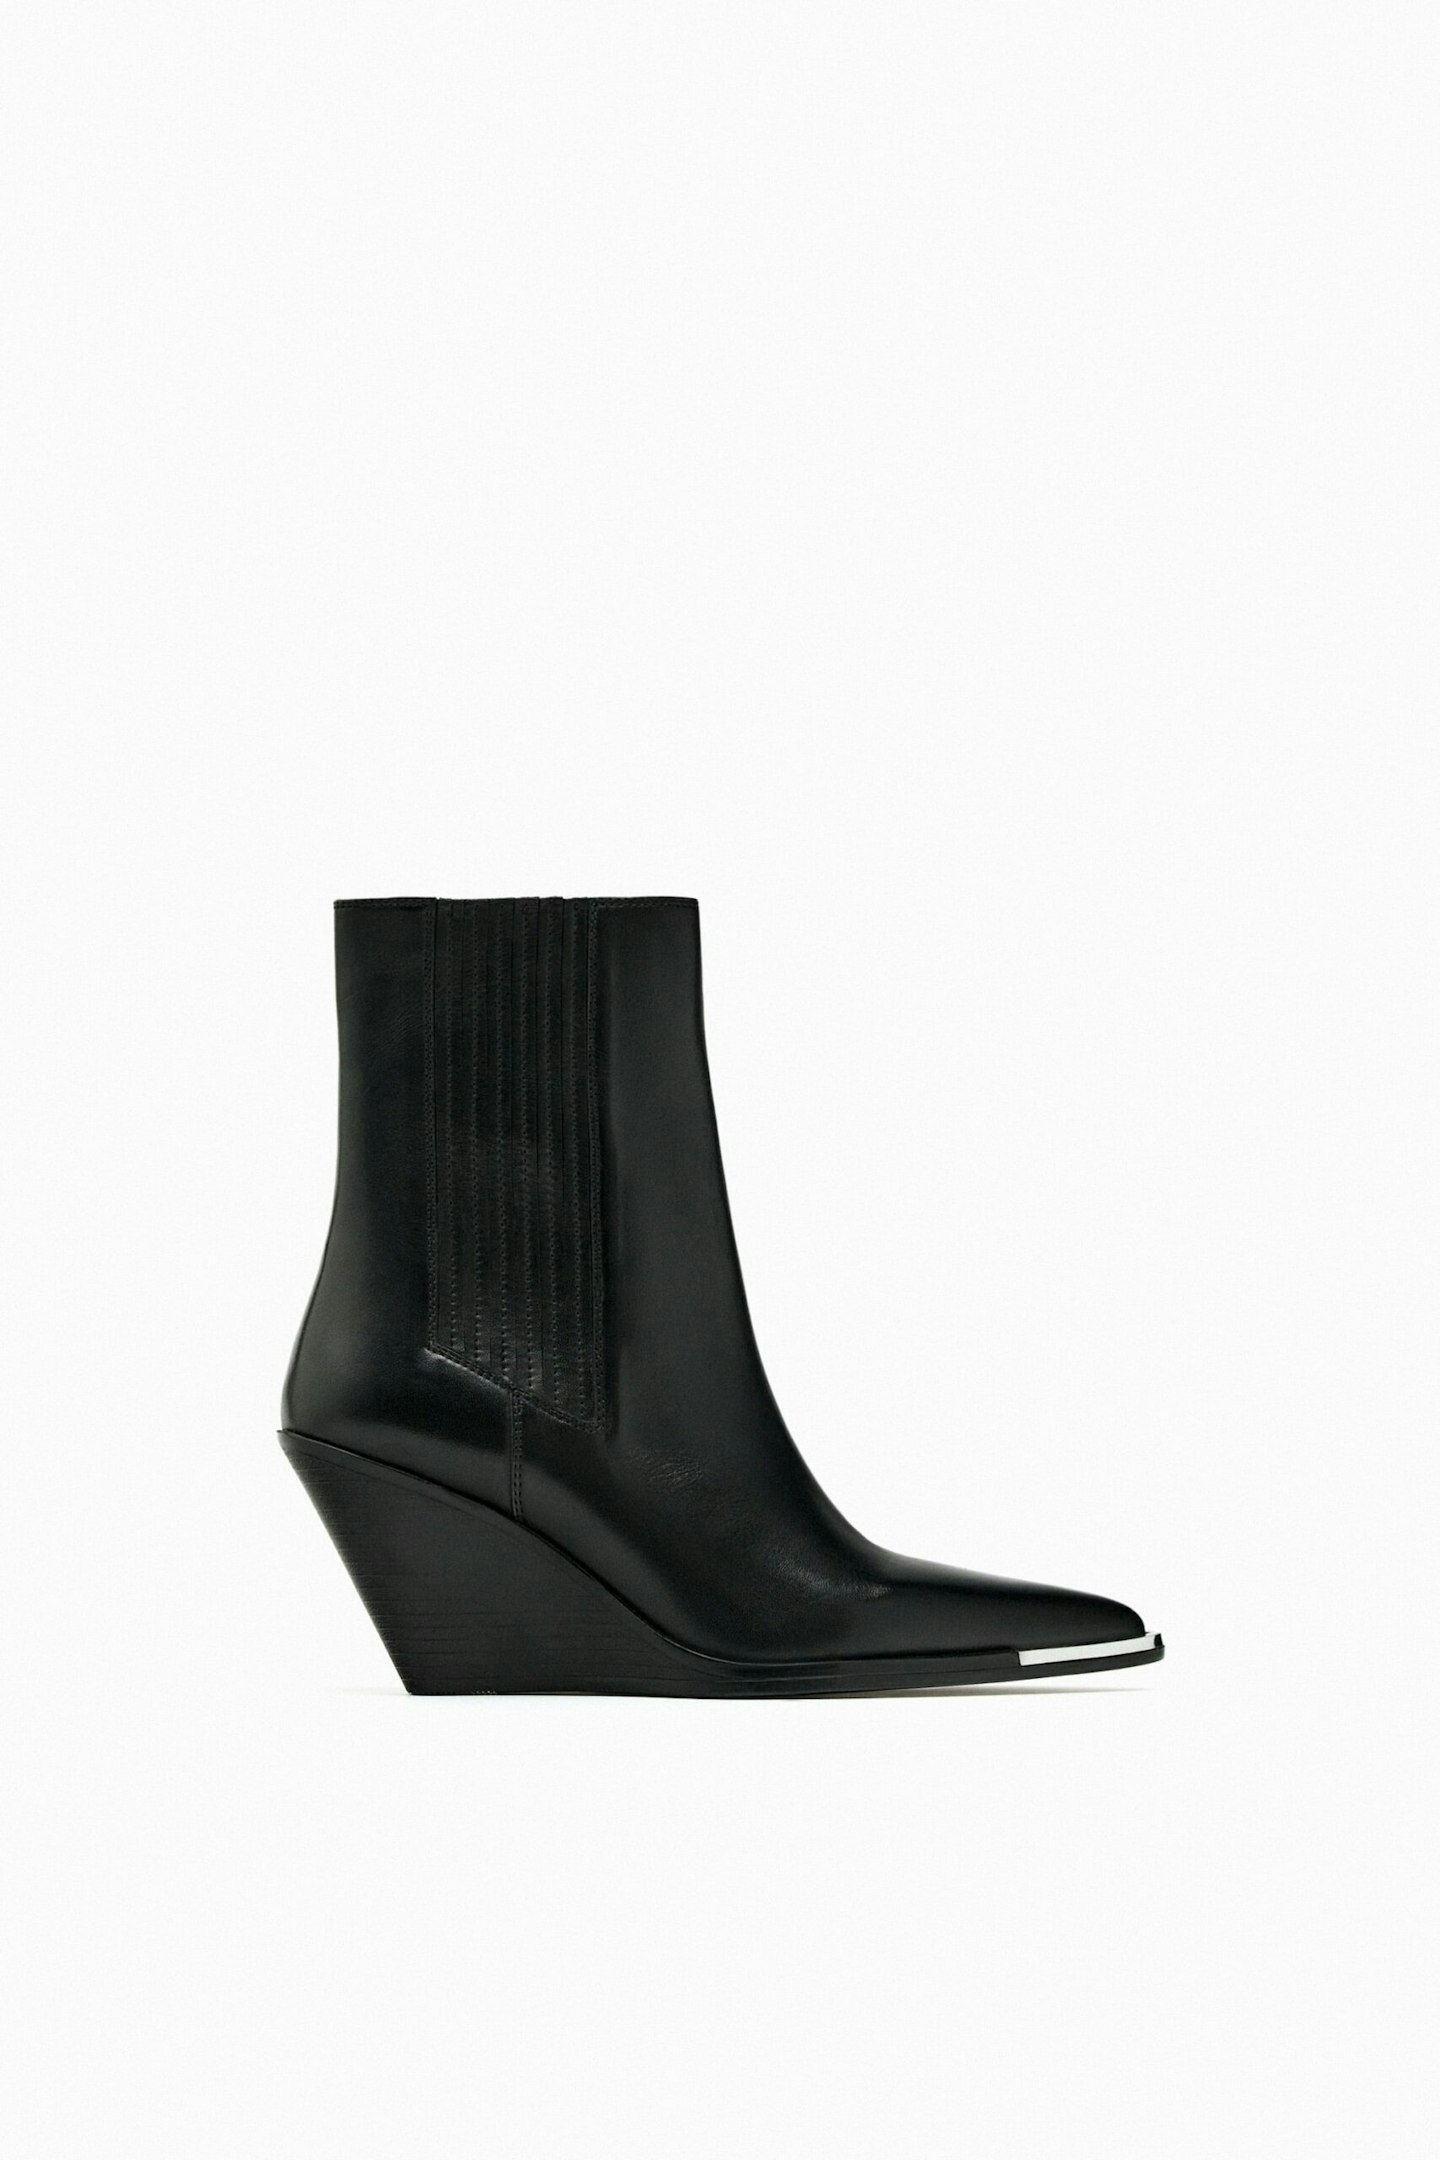 Zara, Leather Wedge Cowboy Ankle Boots